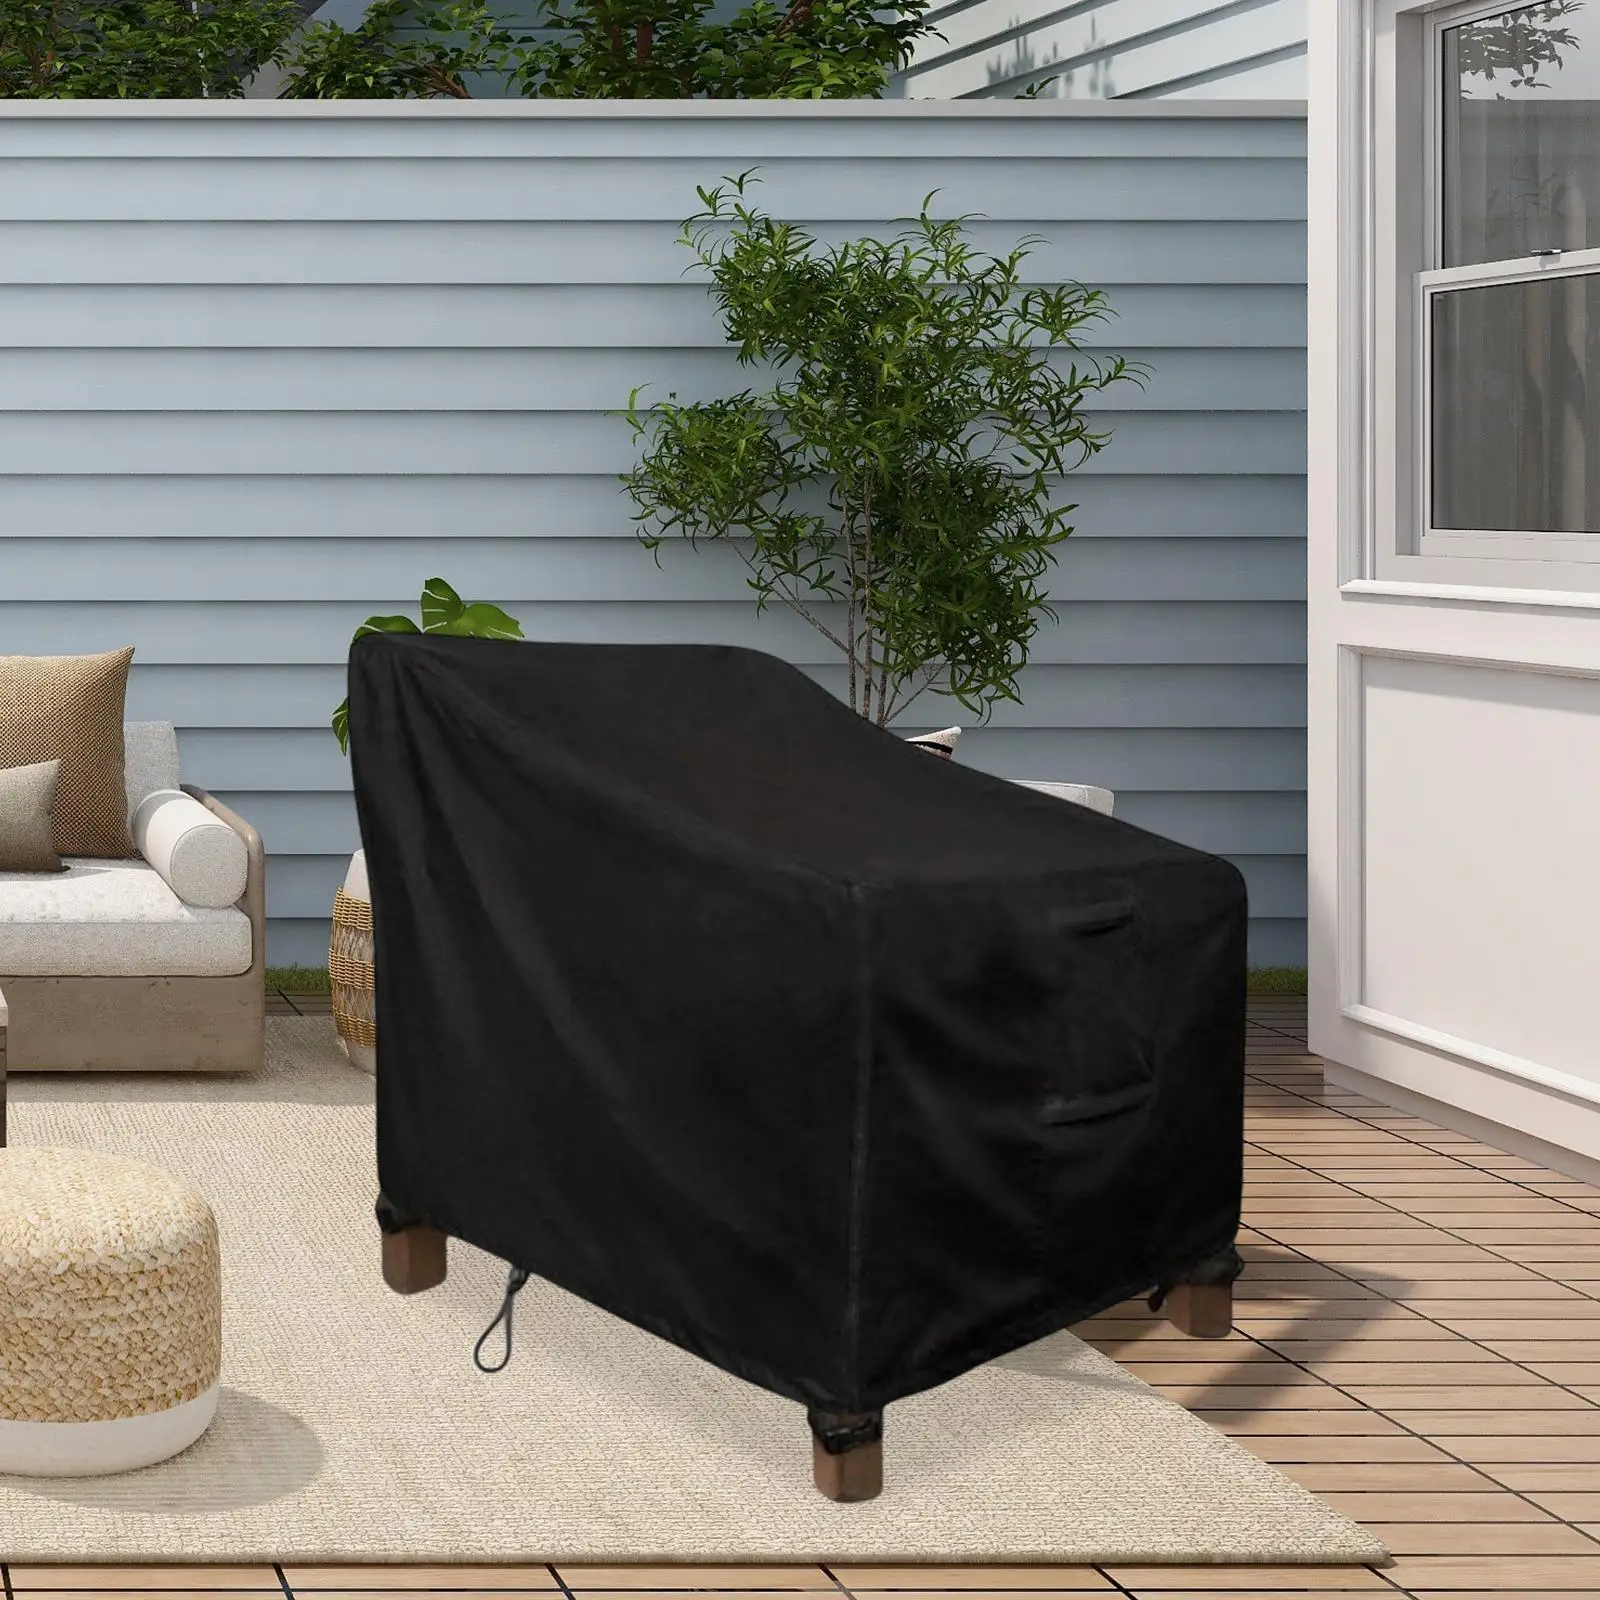 Outdoor Garden Furniture Covers Waterproof Rain Snow Chair Covers Black, Chair Dust Cover